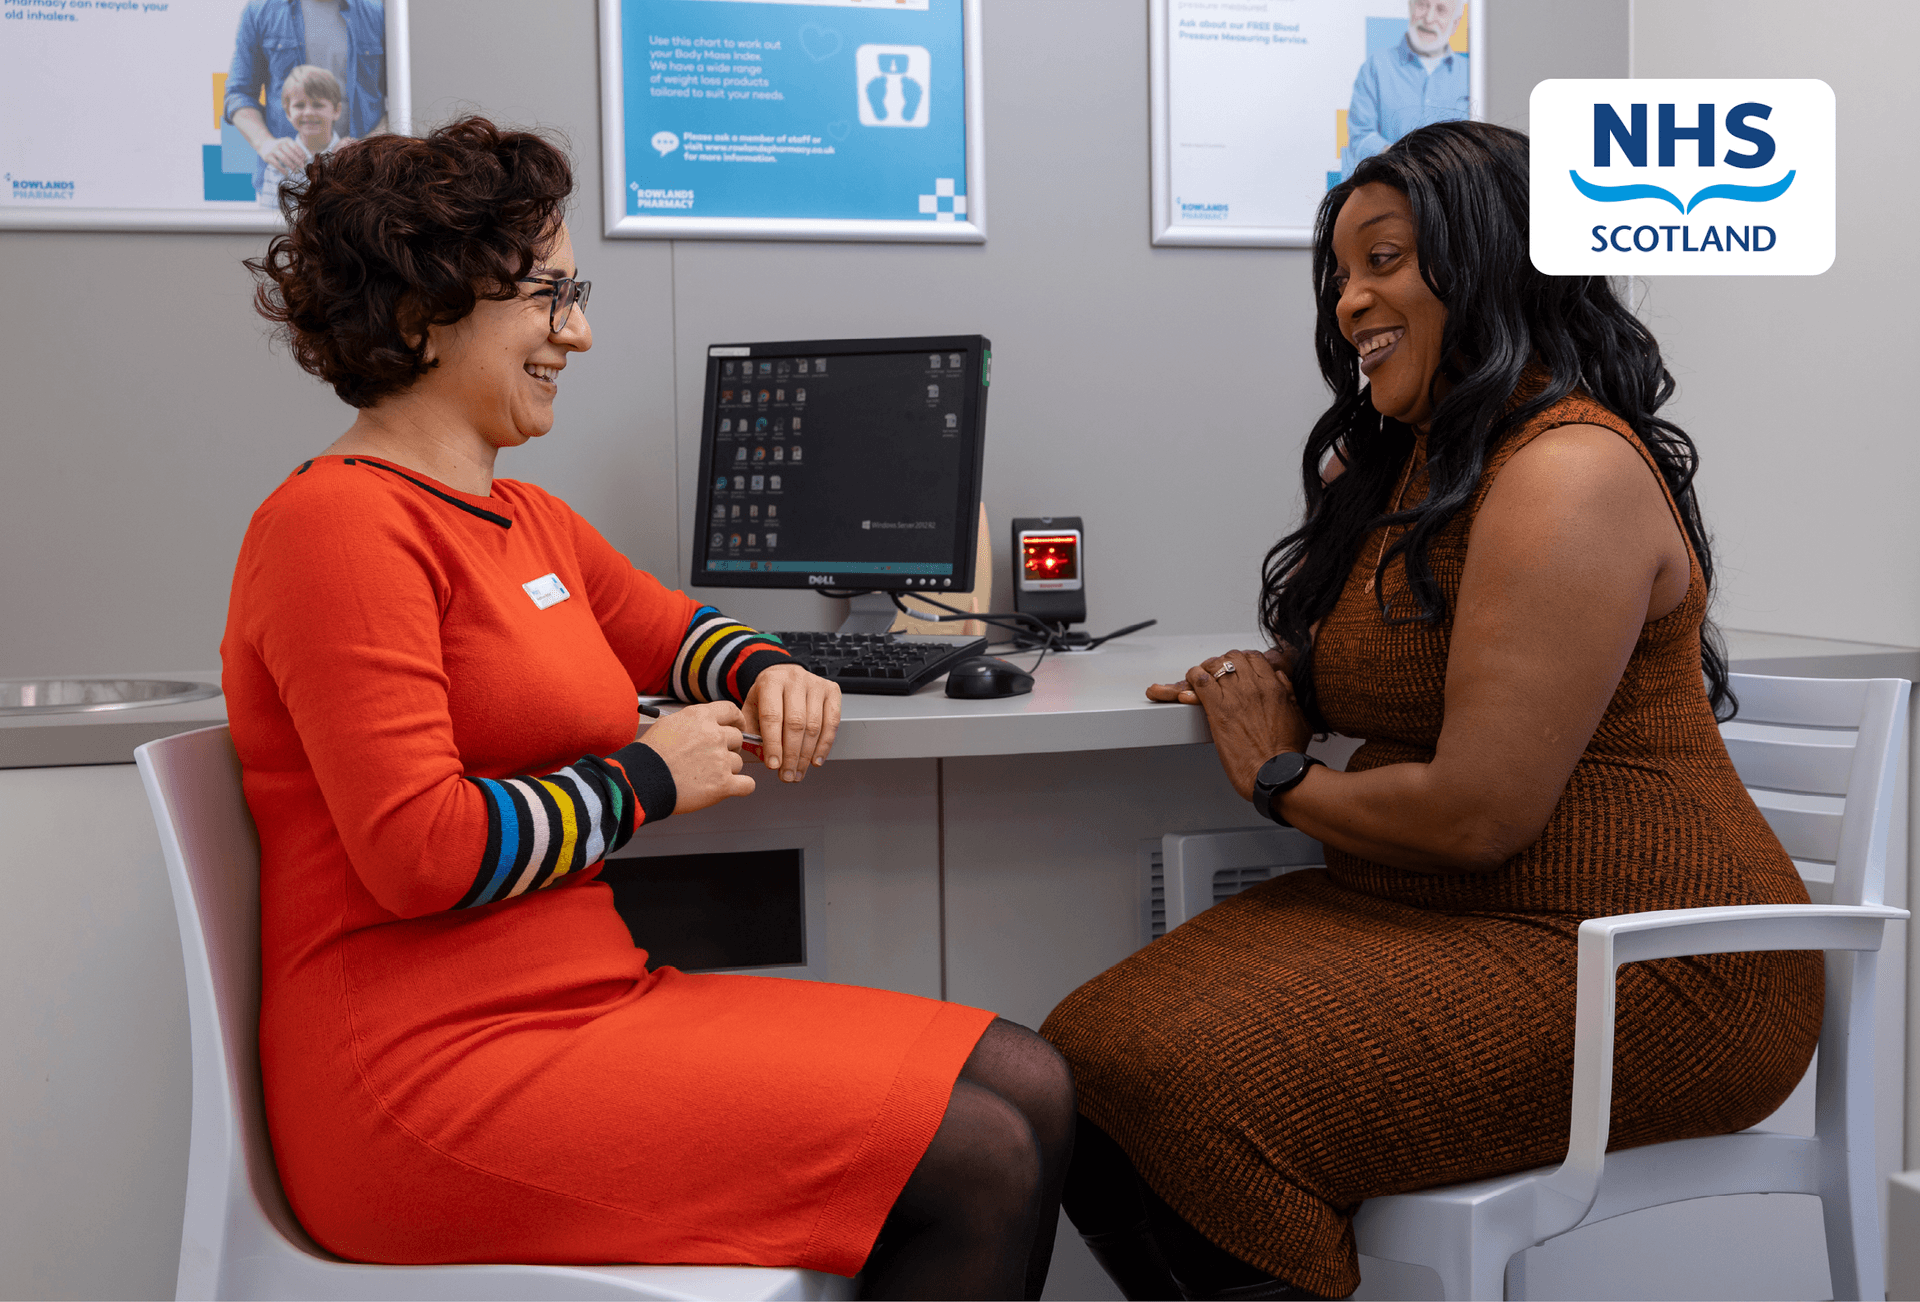 pharmacist giving advice to customer with NHS Scotland logo